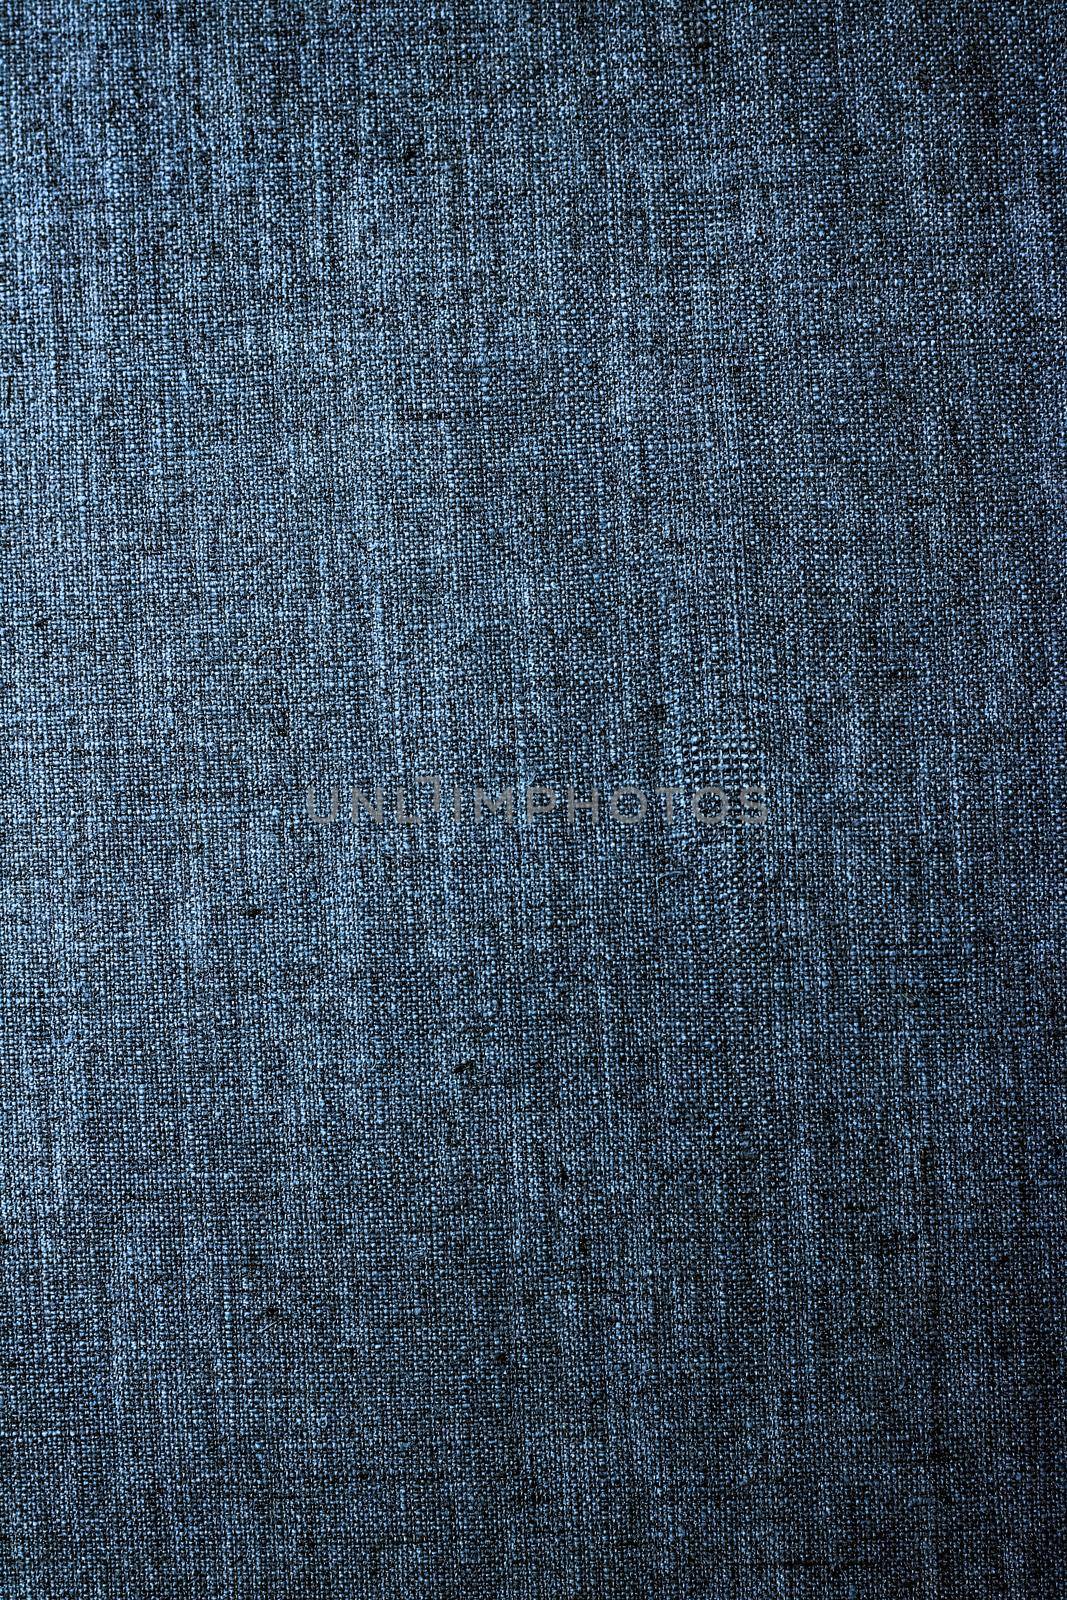 Textile material, natural surface and vintage decor texture concept - Decorative linen blue jeans fabric textured background for interior, furniture design and fashion label backdrop